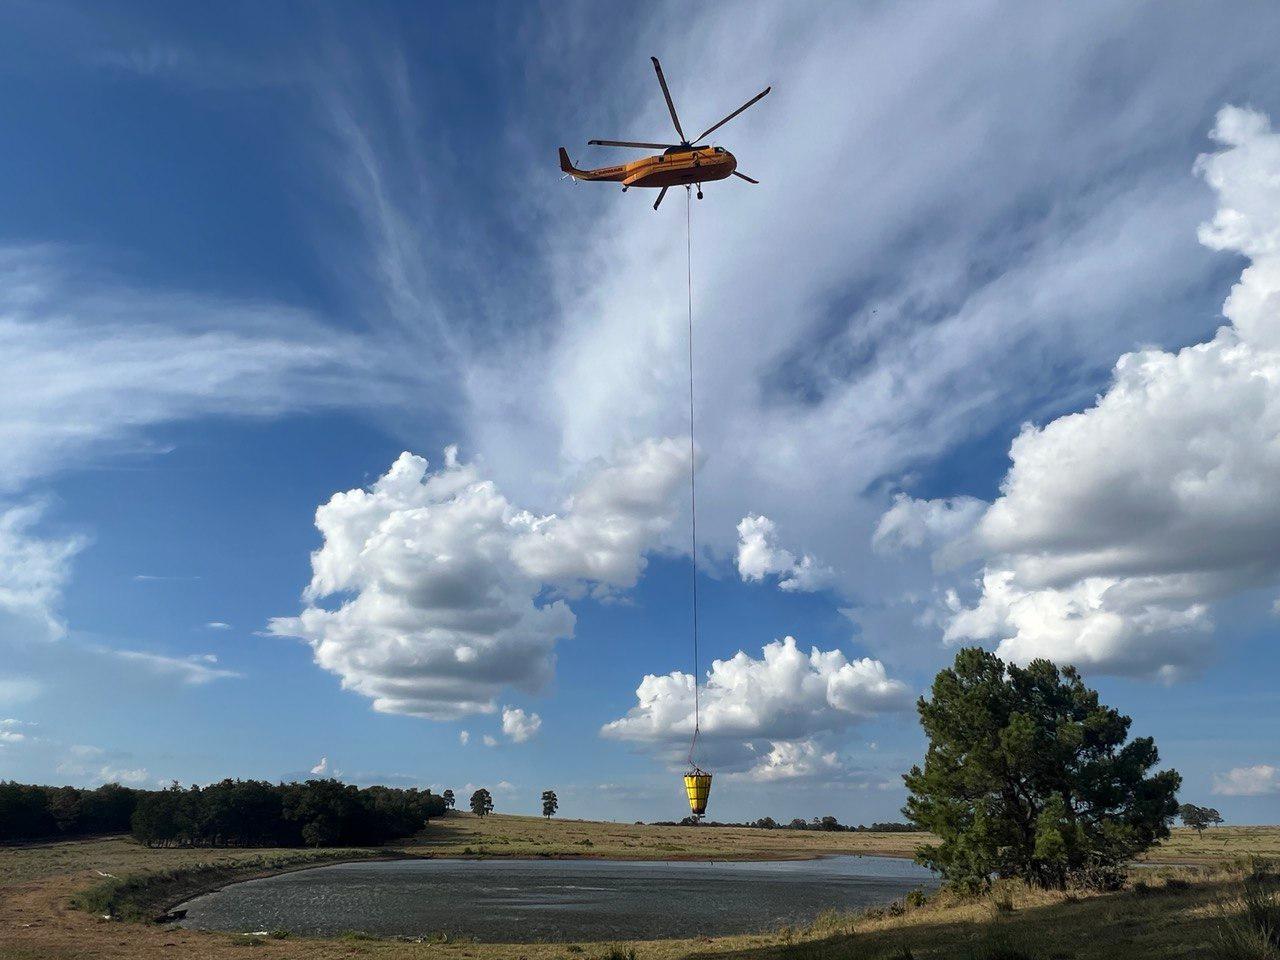 A yellow helicopter hovers over a pond. A long line hangs from the helo and has a yellow bucket at the end. Partly cloudy blue sky in background.